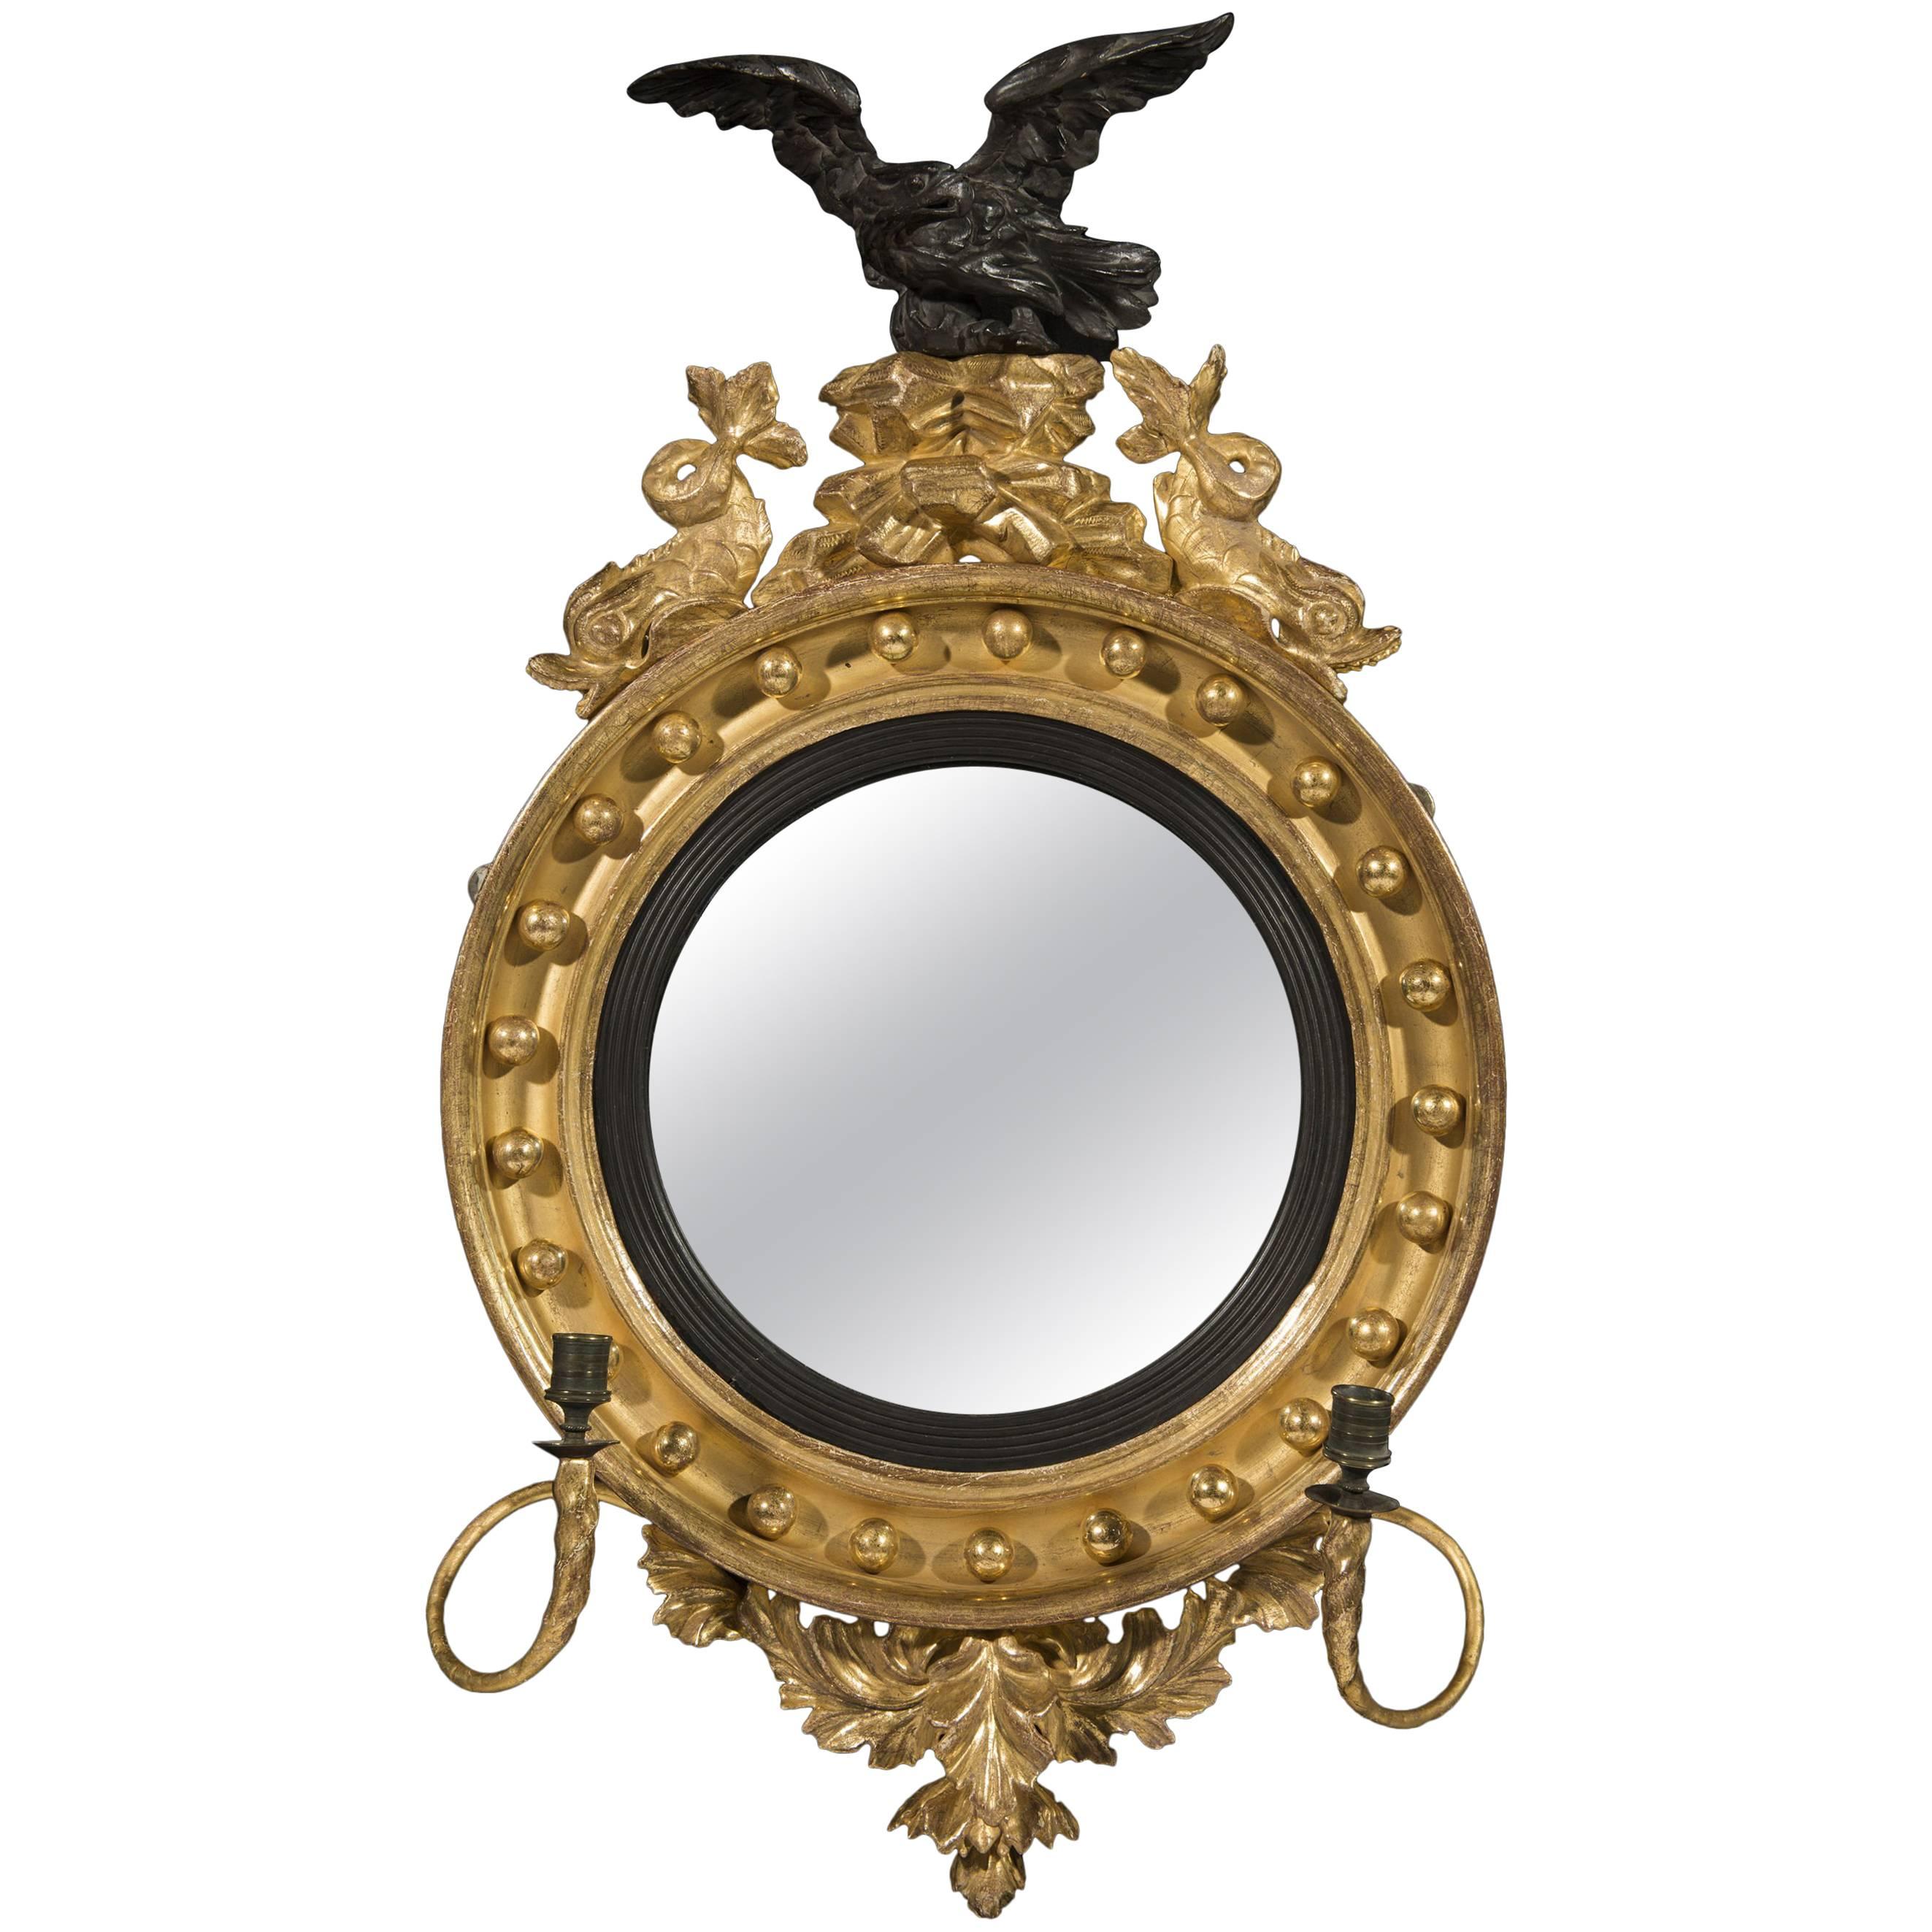 Small Regency Period Carved Giltwood and Gesso Convex Mirror